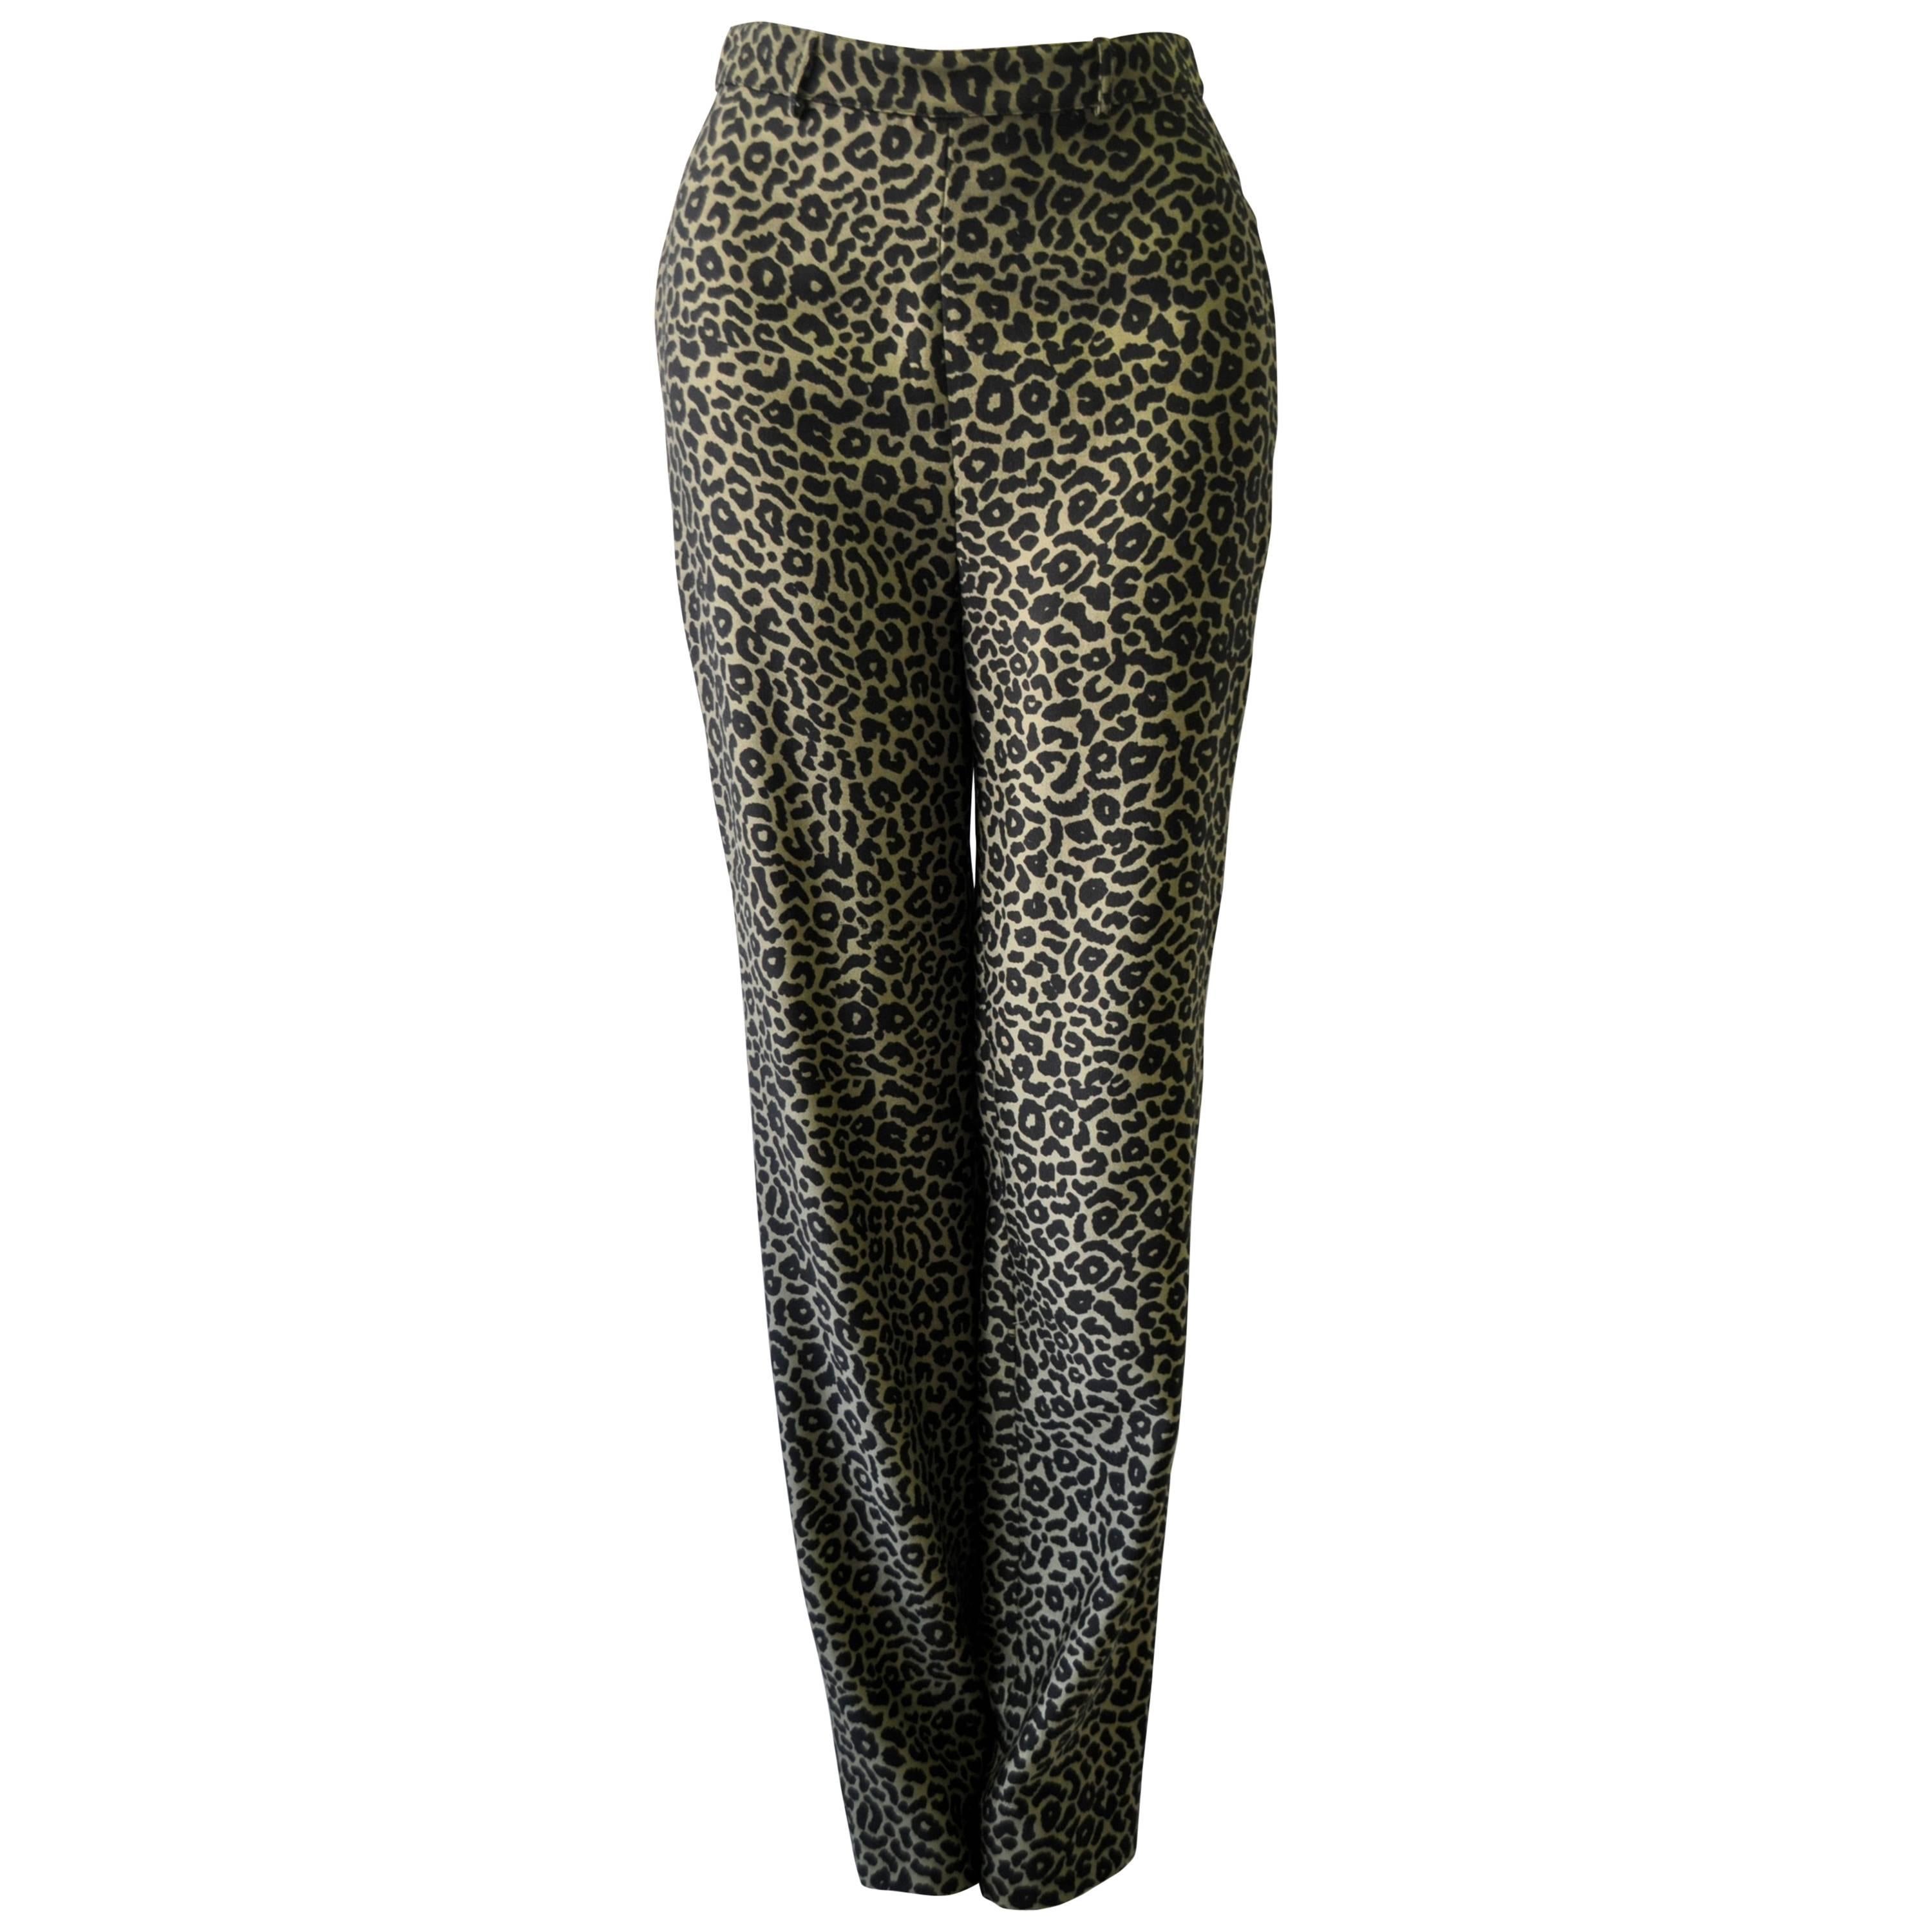 Gianni Versace Istante High Waisted Leopard Print Pants For Sale